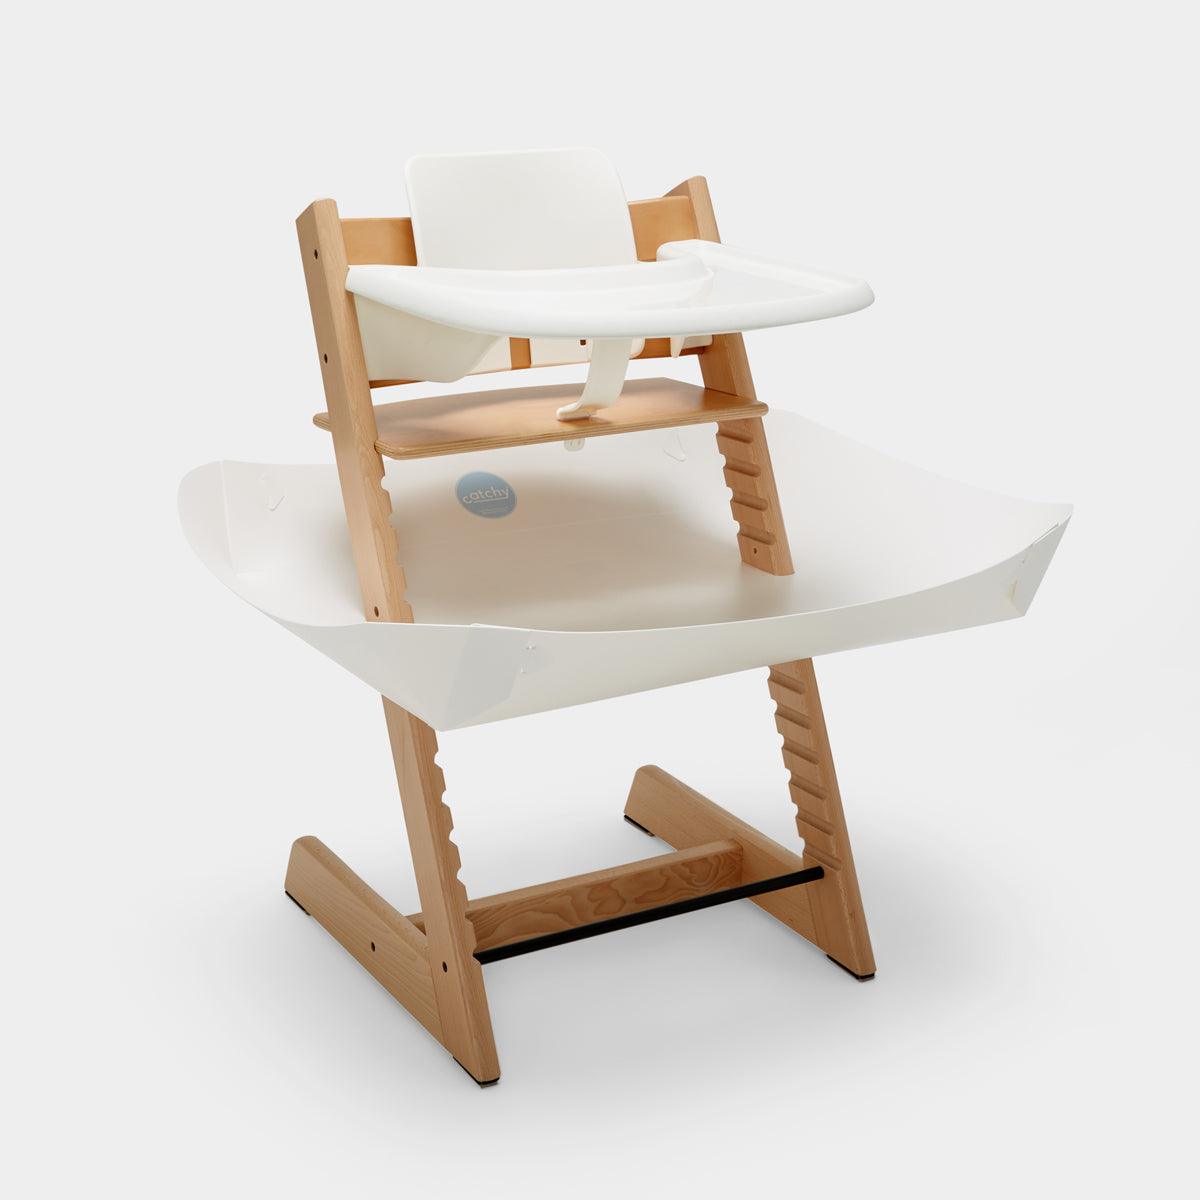 Stokke Tripp Trapp At The Table Bundle - Catchy